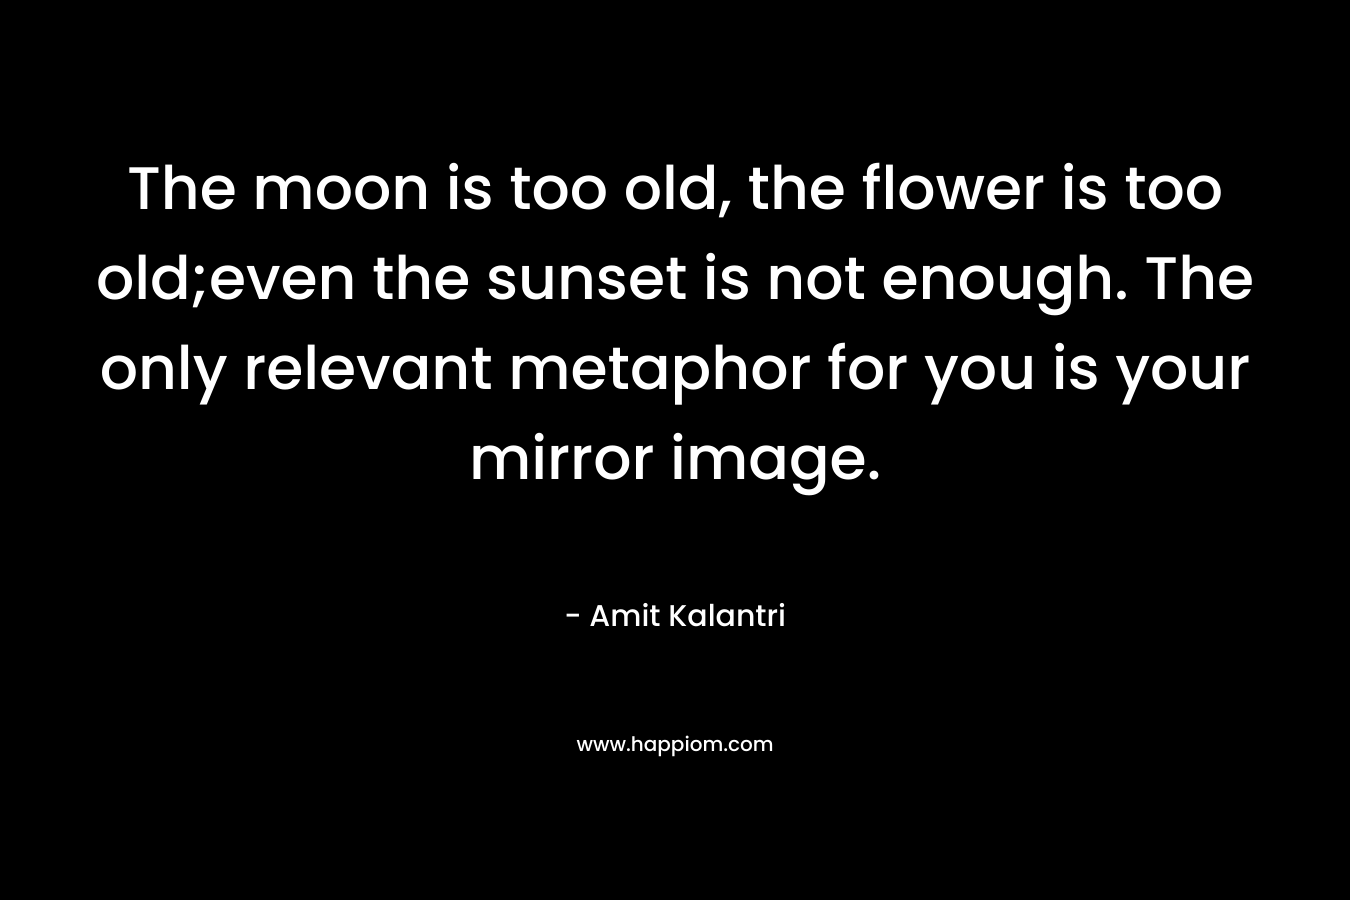 The moon is too old, the flower is too old;even the sunset is not enough. The only relevant metaphor for you is your mirror image.